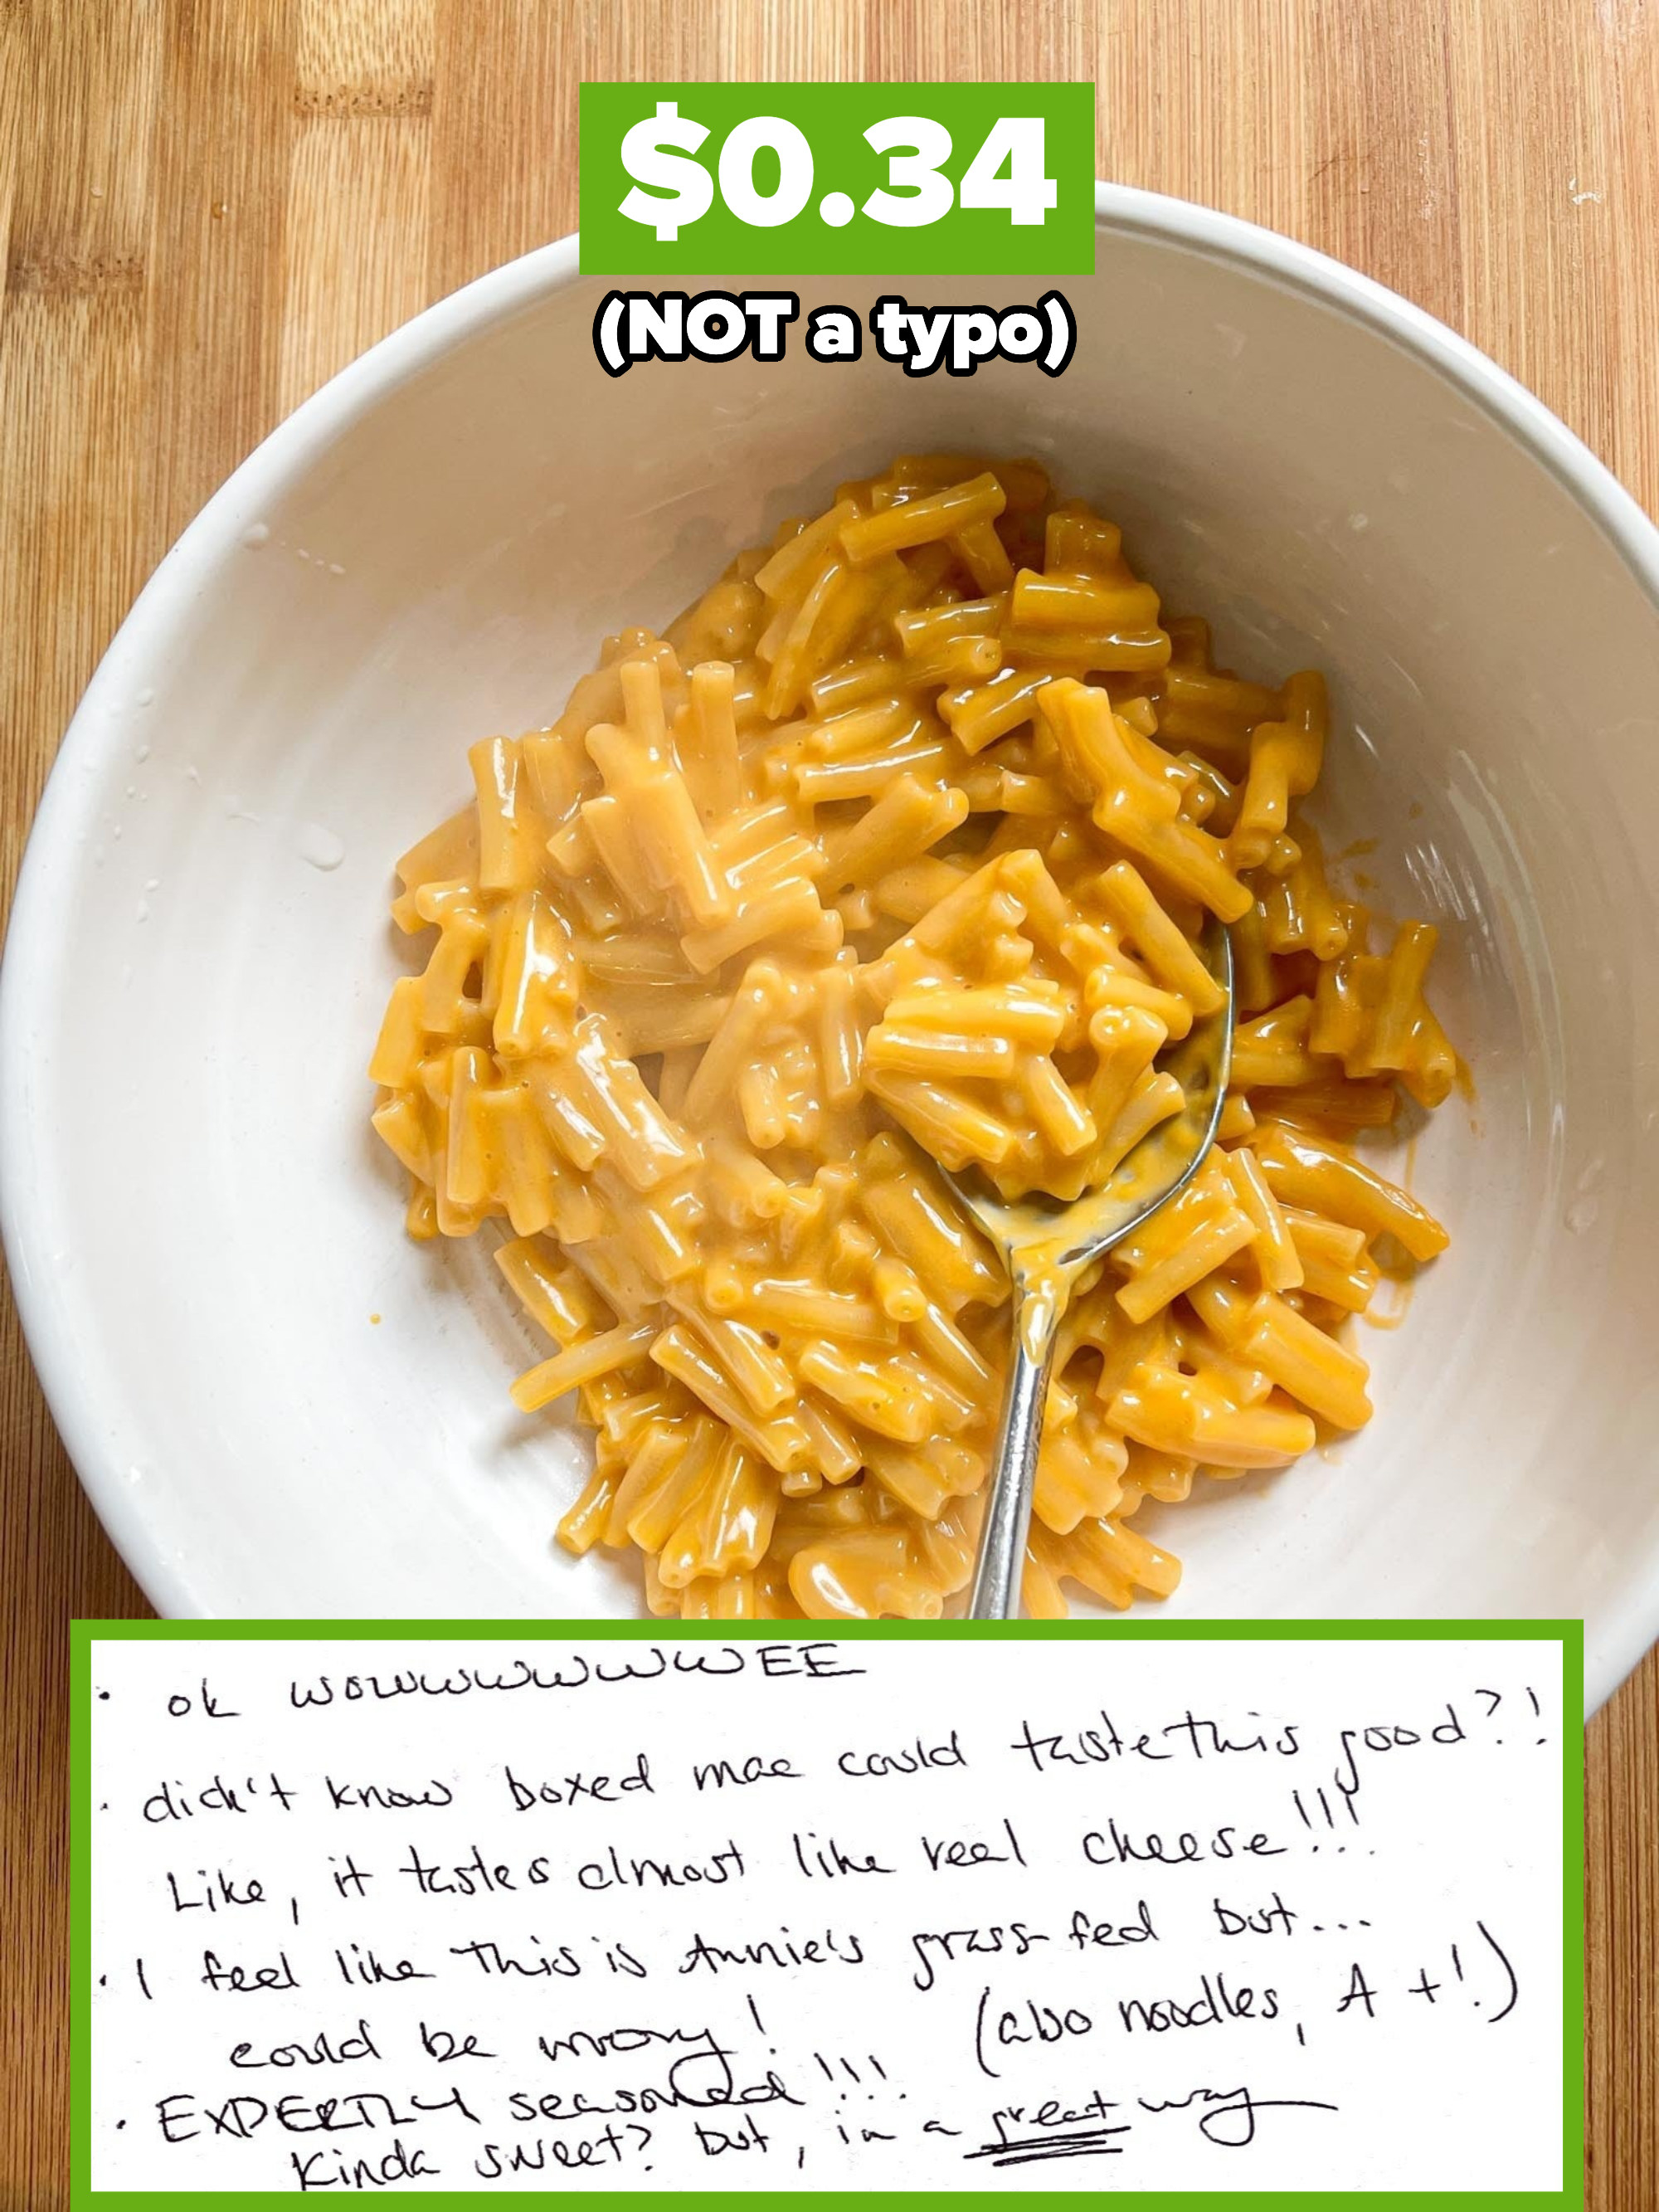 cost: $0.34, not a typo! Author&#x27;s handwritten notes at the bottom, including &quot;ok WOWEE&quot; and &quot;I didn&#x27;t know boxed mac could taste this good&quot;